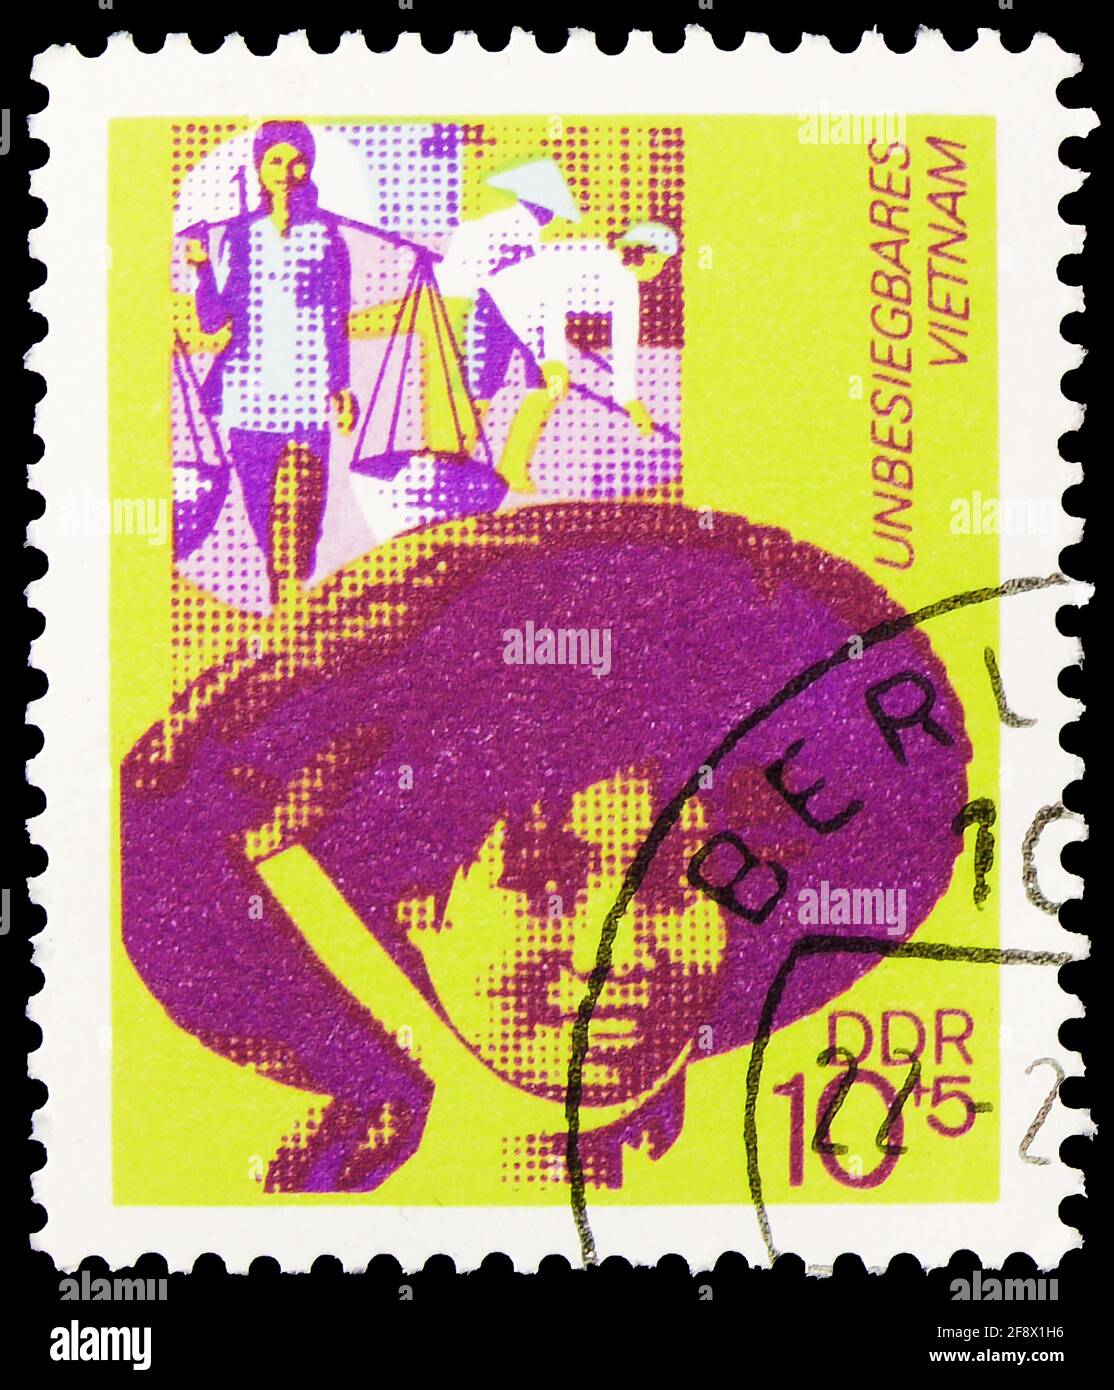 MOSCOW, RUSSIA - OCTOBER 1, 2019: Postage stamp printed in Germany, Democratic Republic, shows Vietnamese, Invincible Vietnam serie, 10+5 Pf. - East G Stock Photo